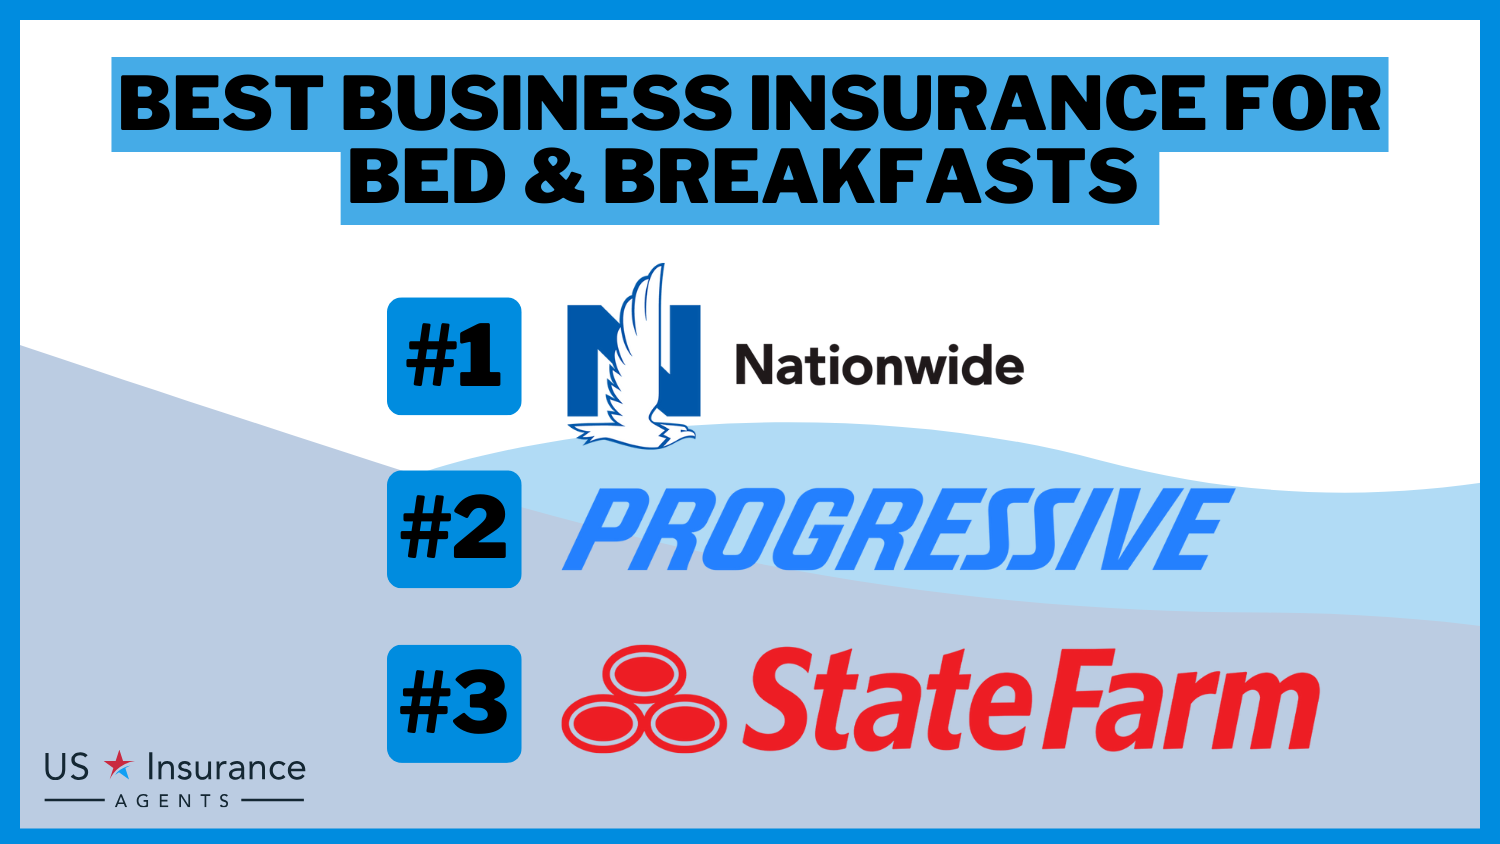 3 Best Business Insurance for Bed & Breakfasts: Nationwide, Progressive and State Farm.